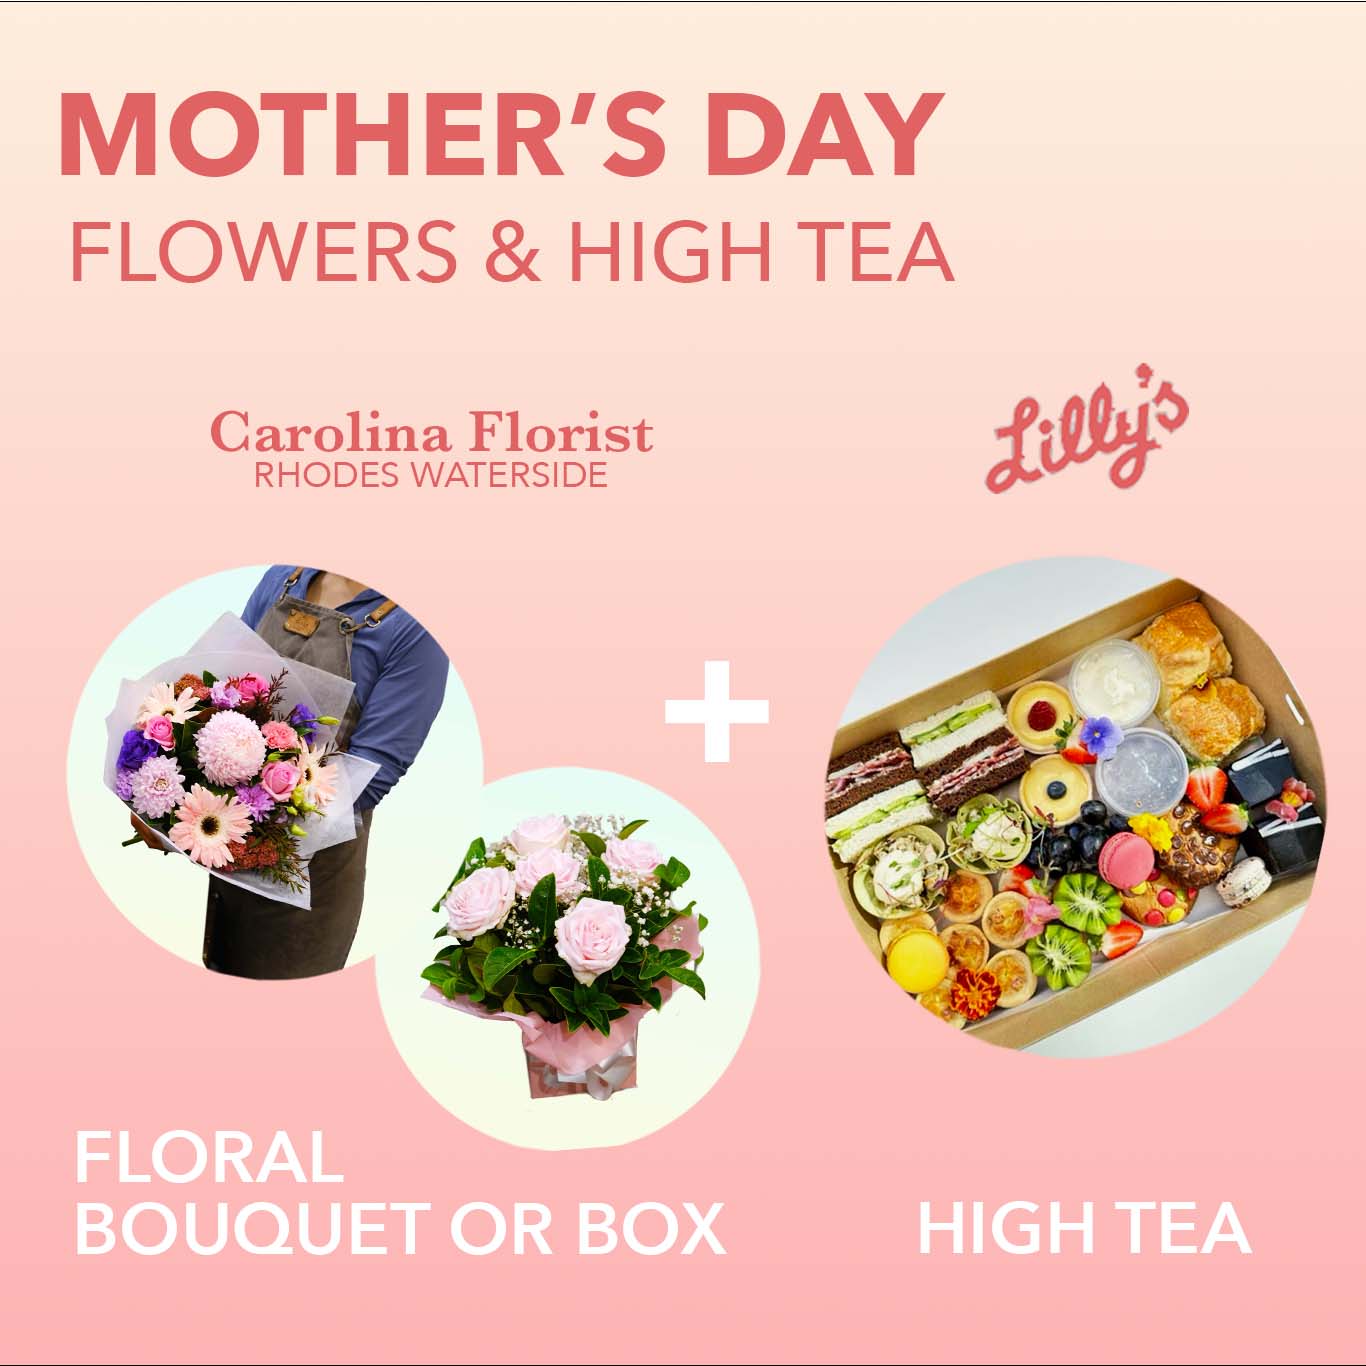 MOTHER'S DAY SPECIAL | Flowers & High Tea Package